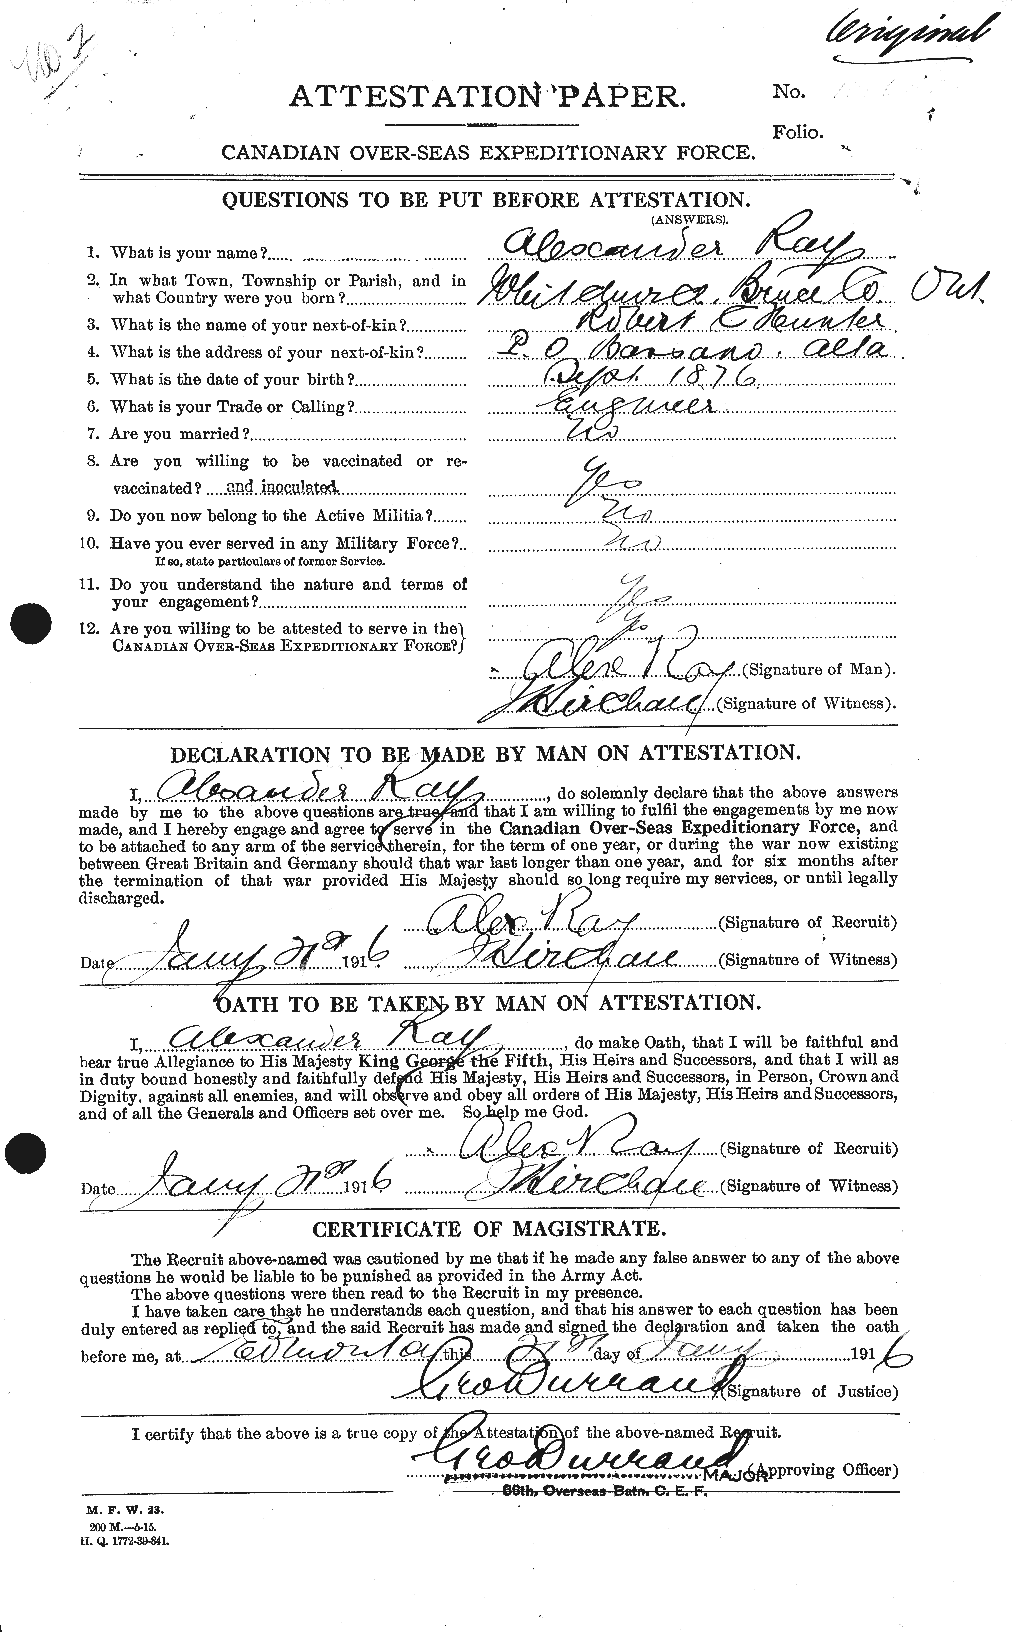 Personnel Records of the First World War - CEF 594669a